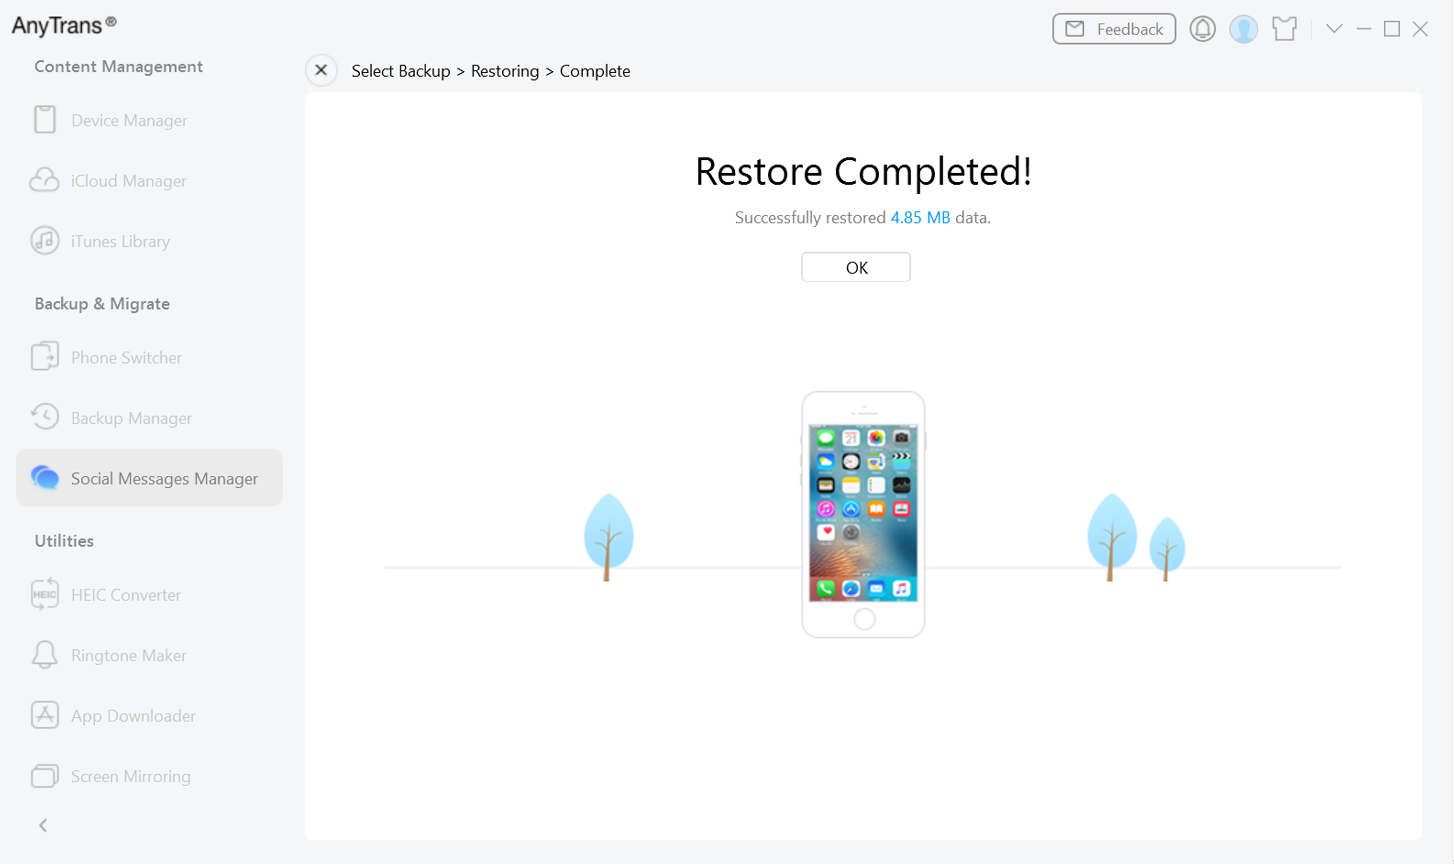 Restore Completed